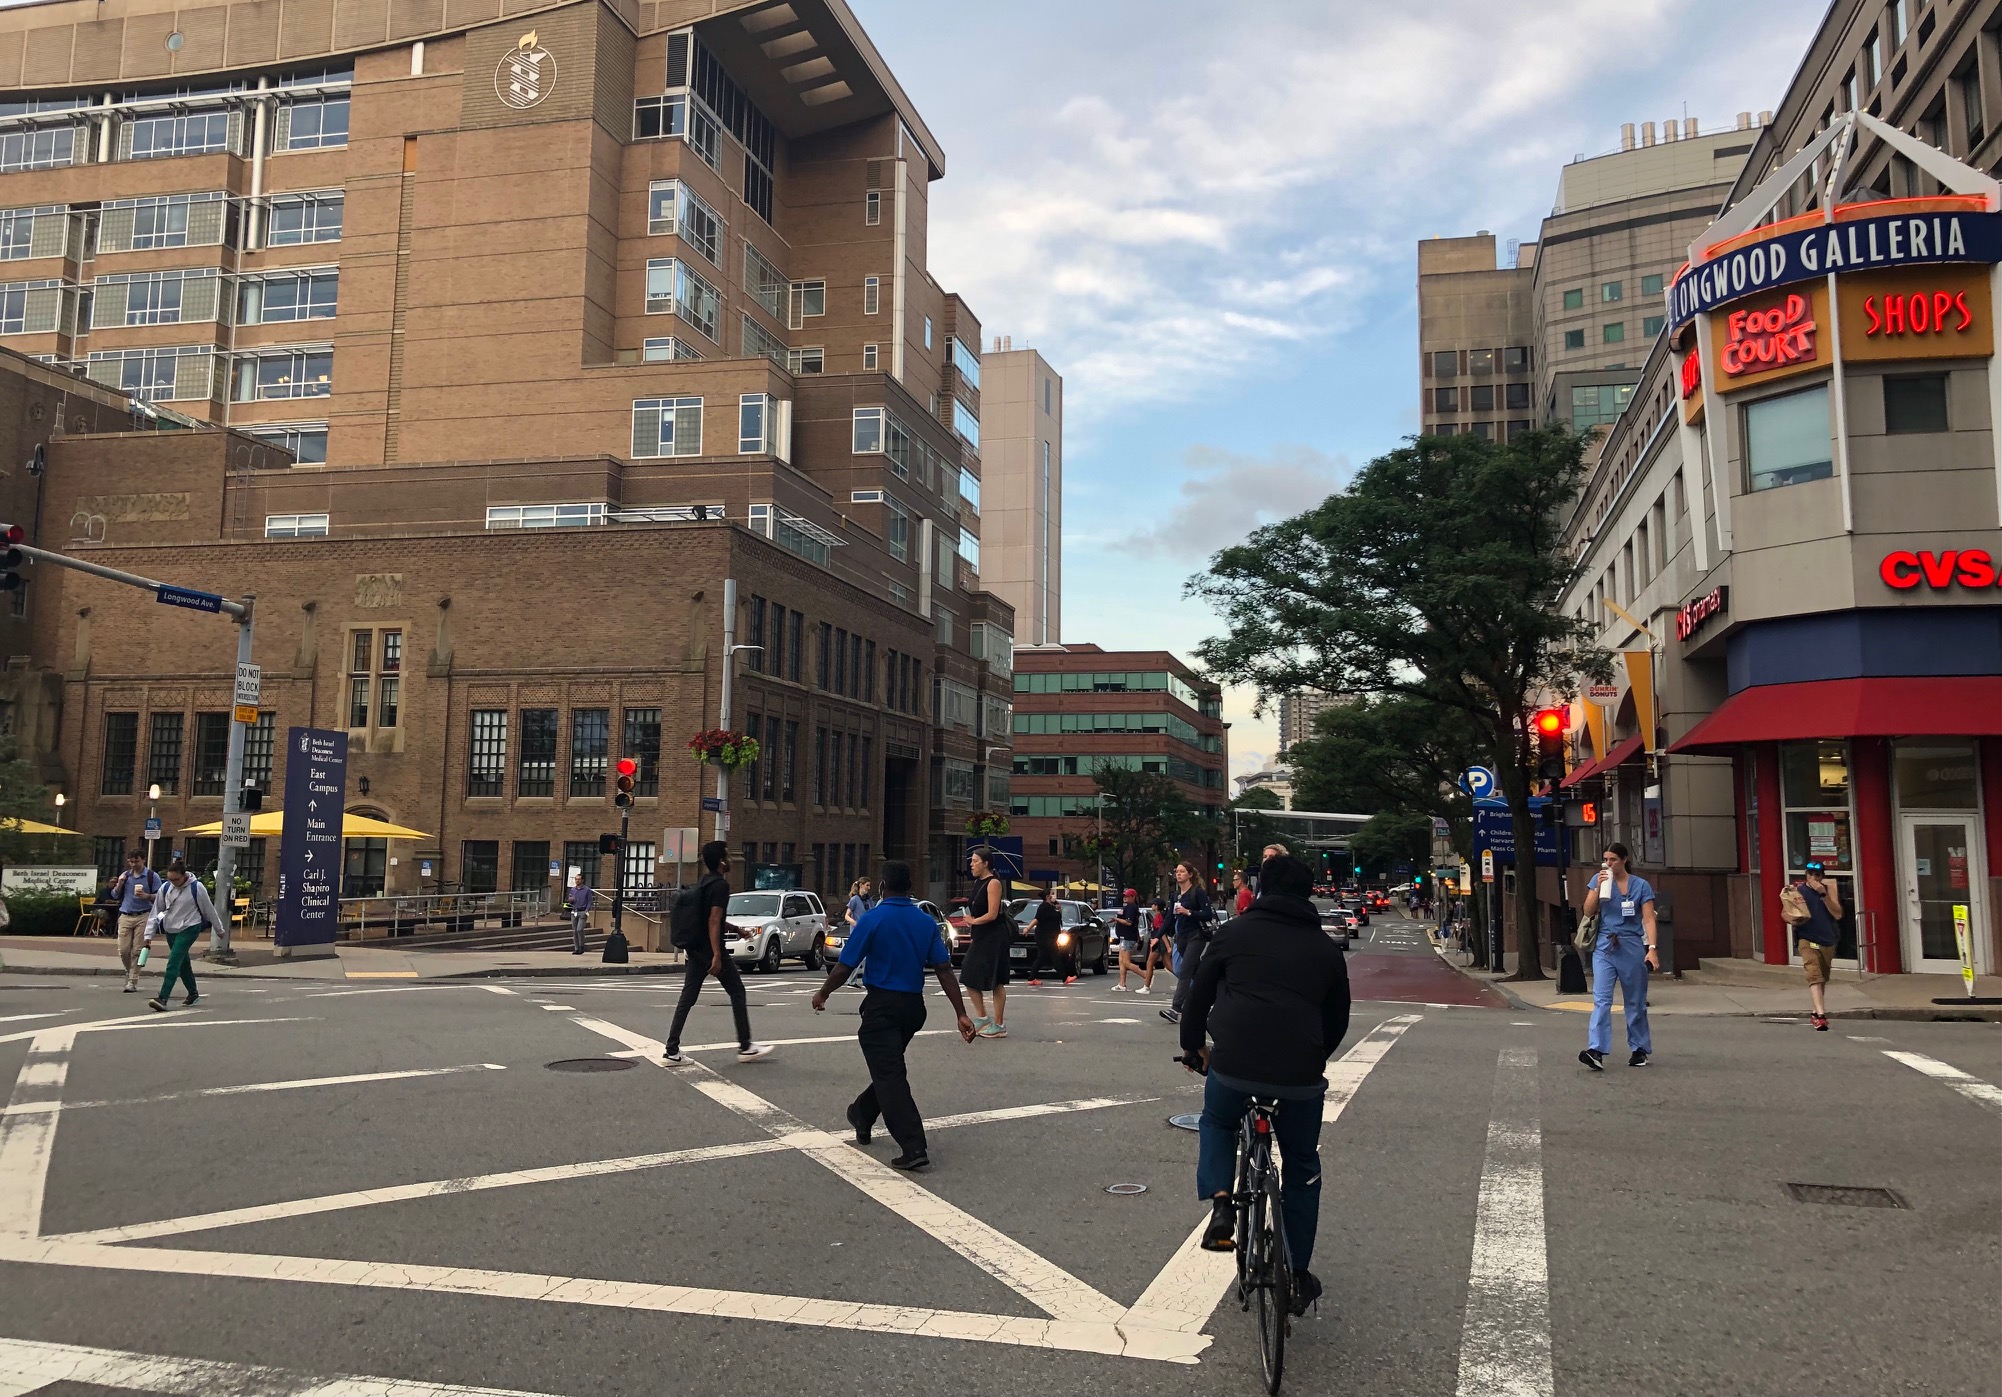 A dozen people walking in all directions, plus one person on a bicycle, crossing the intersection of Brookline and Longwood Avenues under the Longwood Galleria neon sign. The Longwood Area's skyline of hospital buildings is visible in the background.